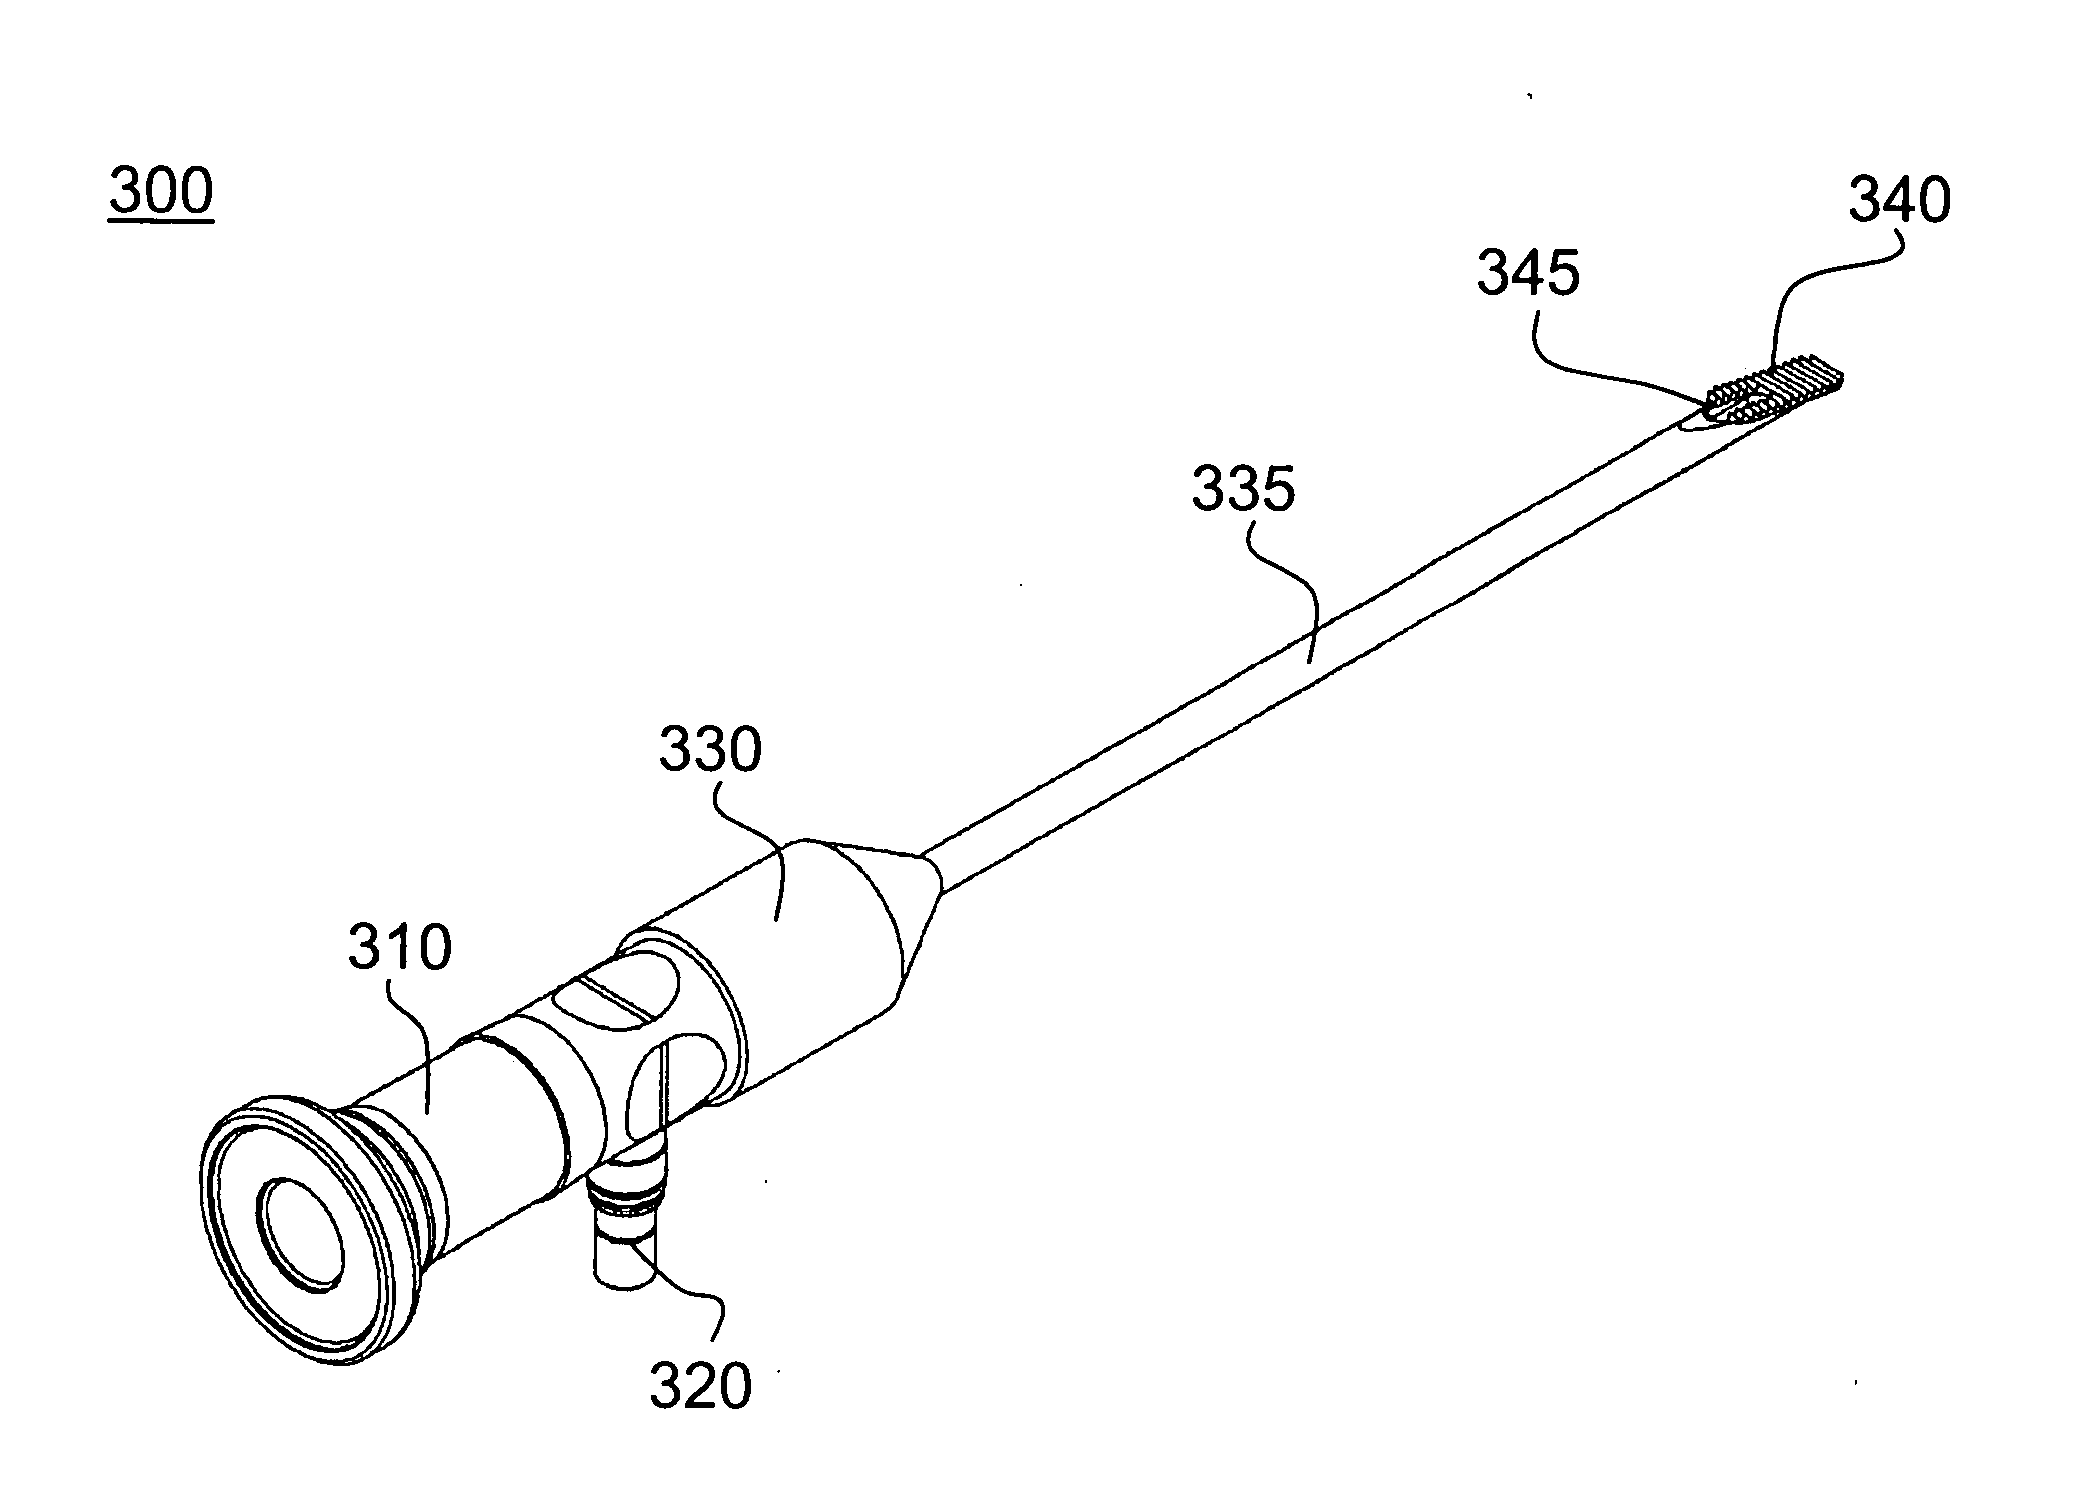 Apparatus and method for releasing tendon sheath